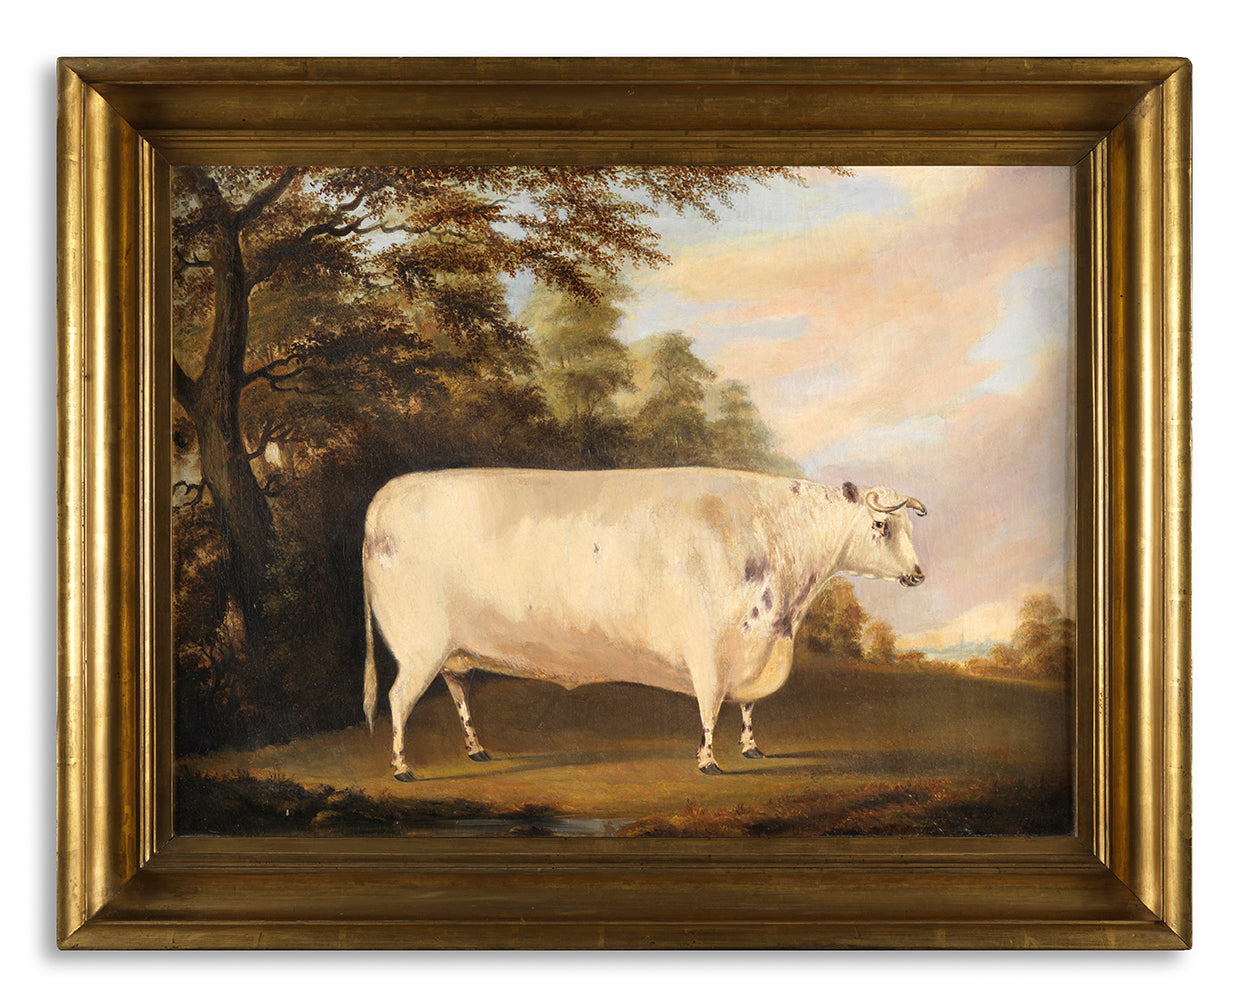 Depicting a Large Square White Bull in a Stylised Landscape